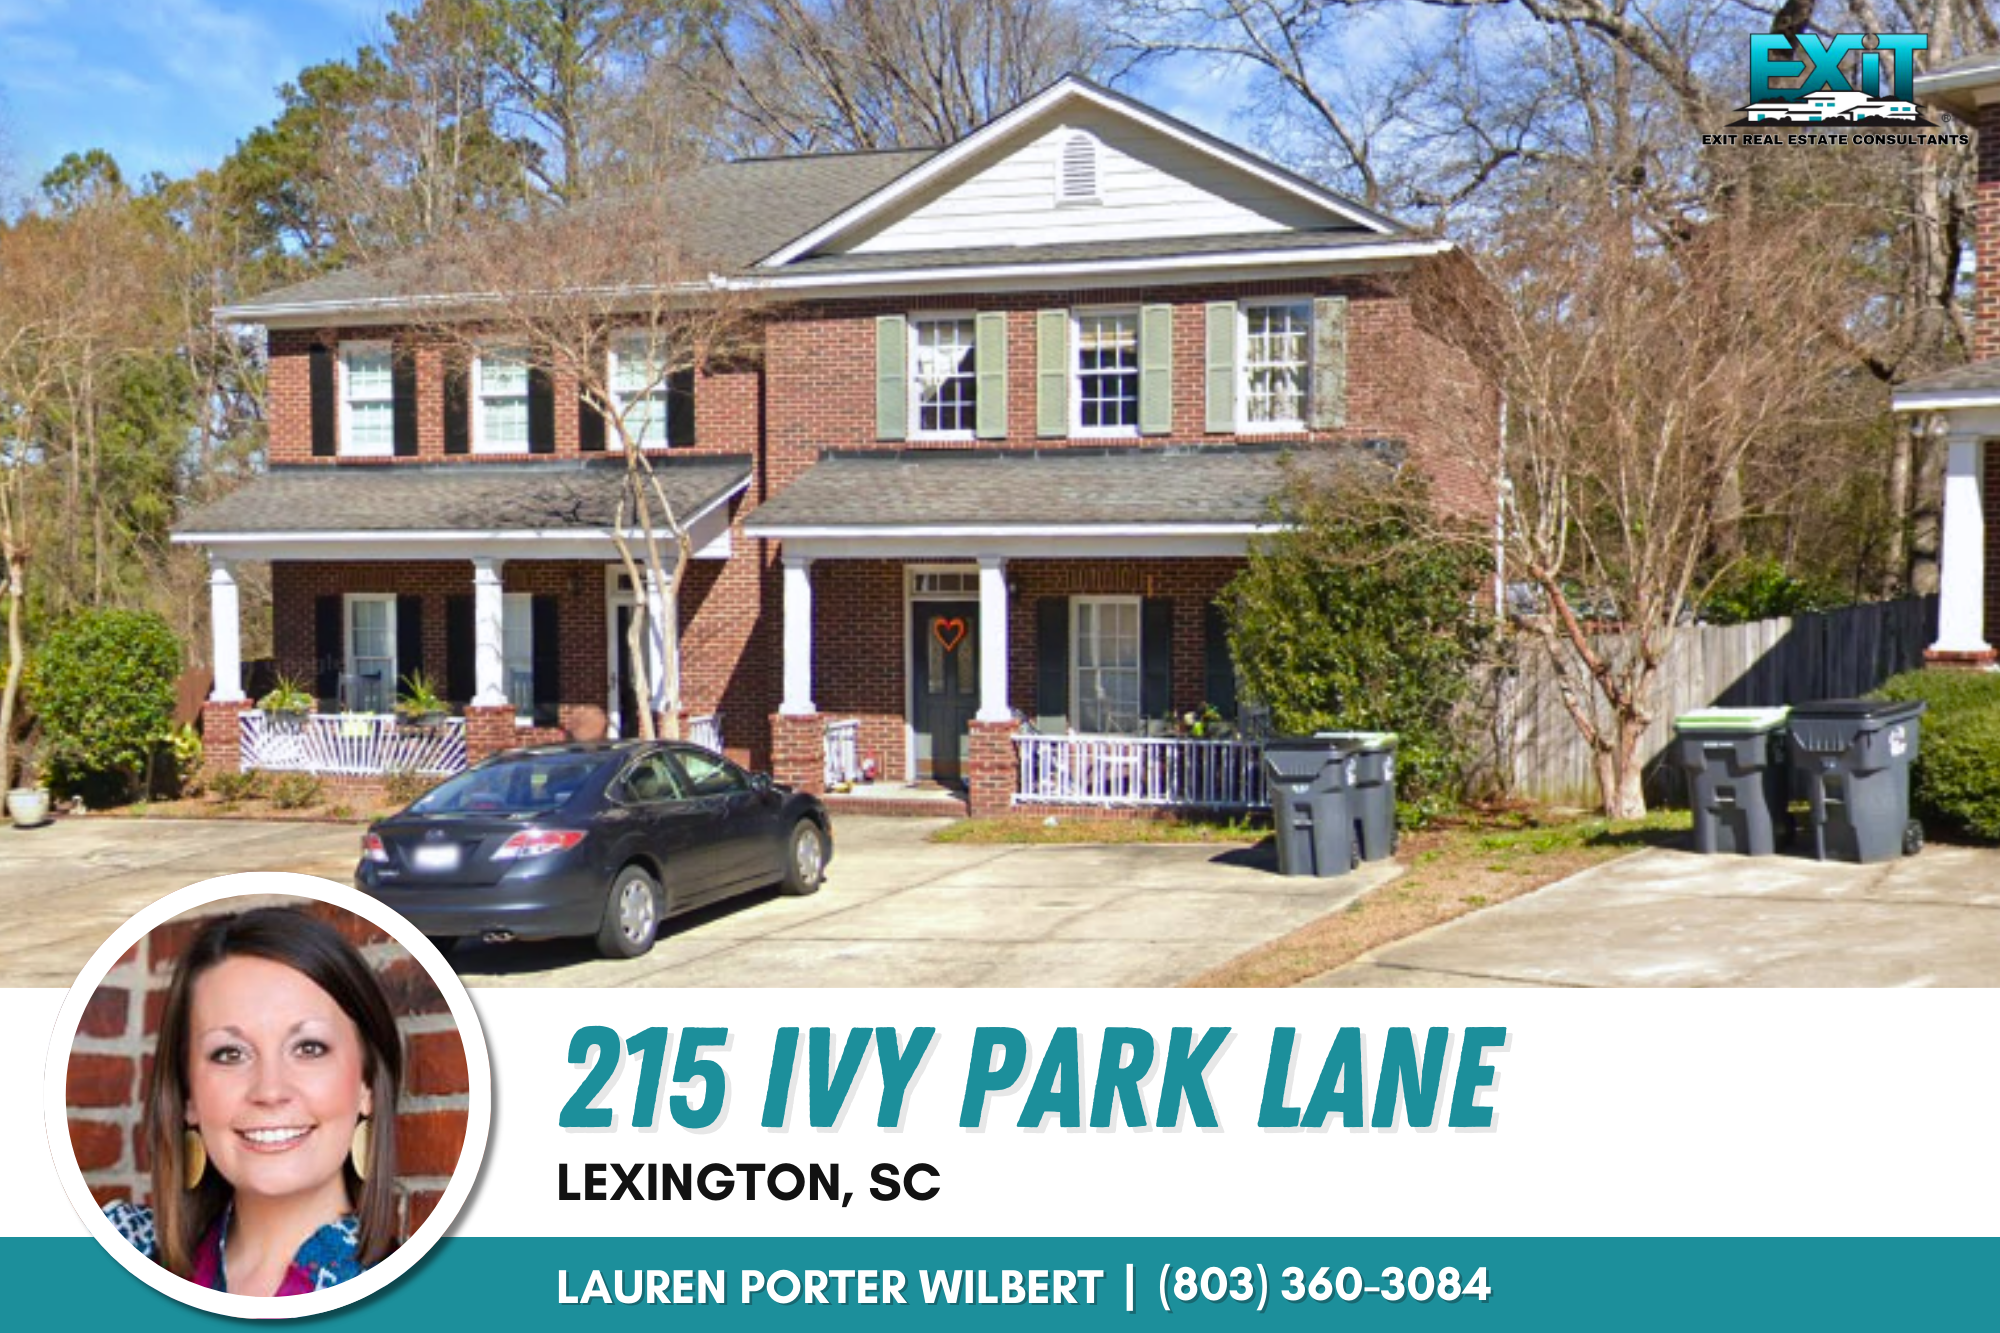 Just listed in Ivy Park - Lexington